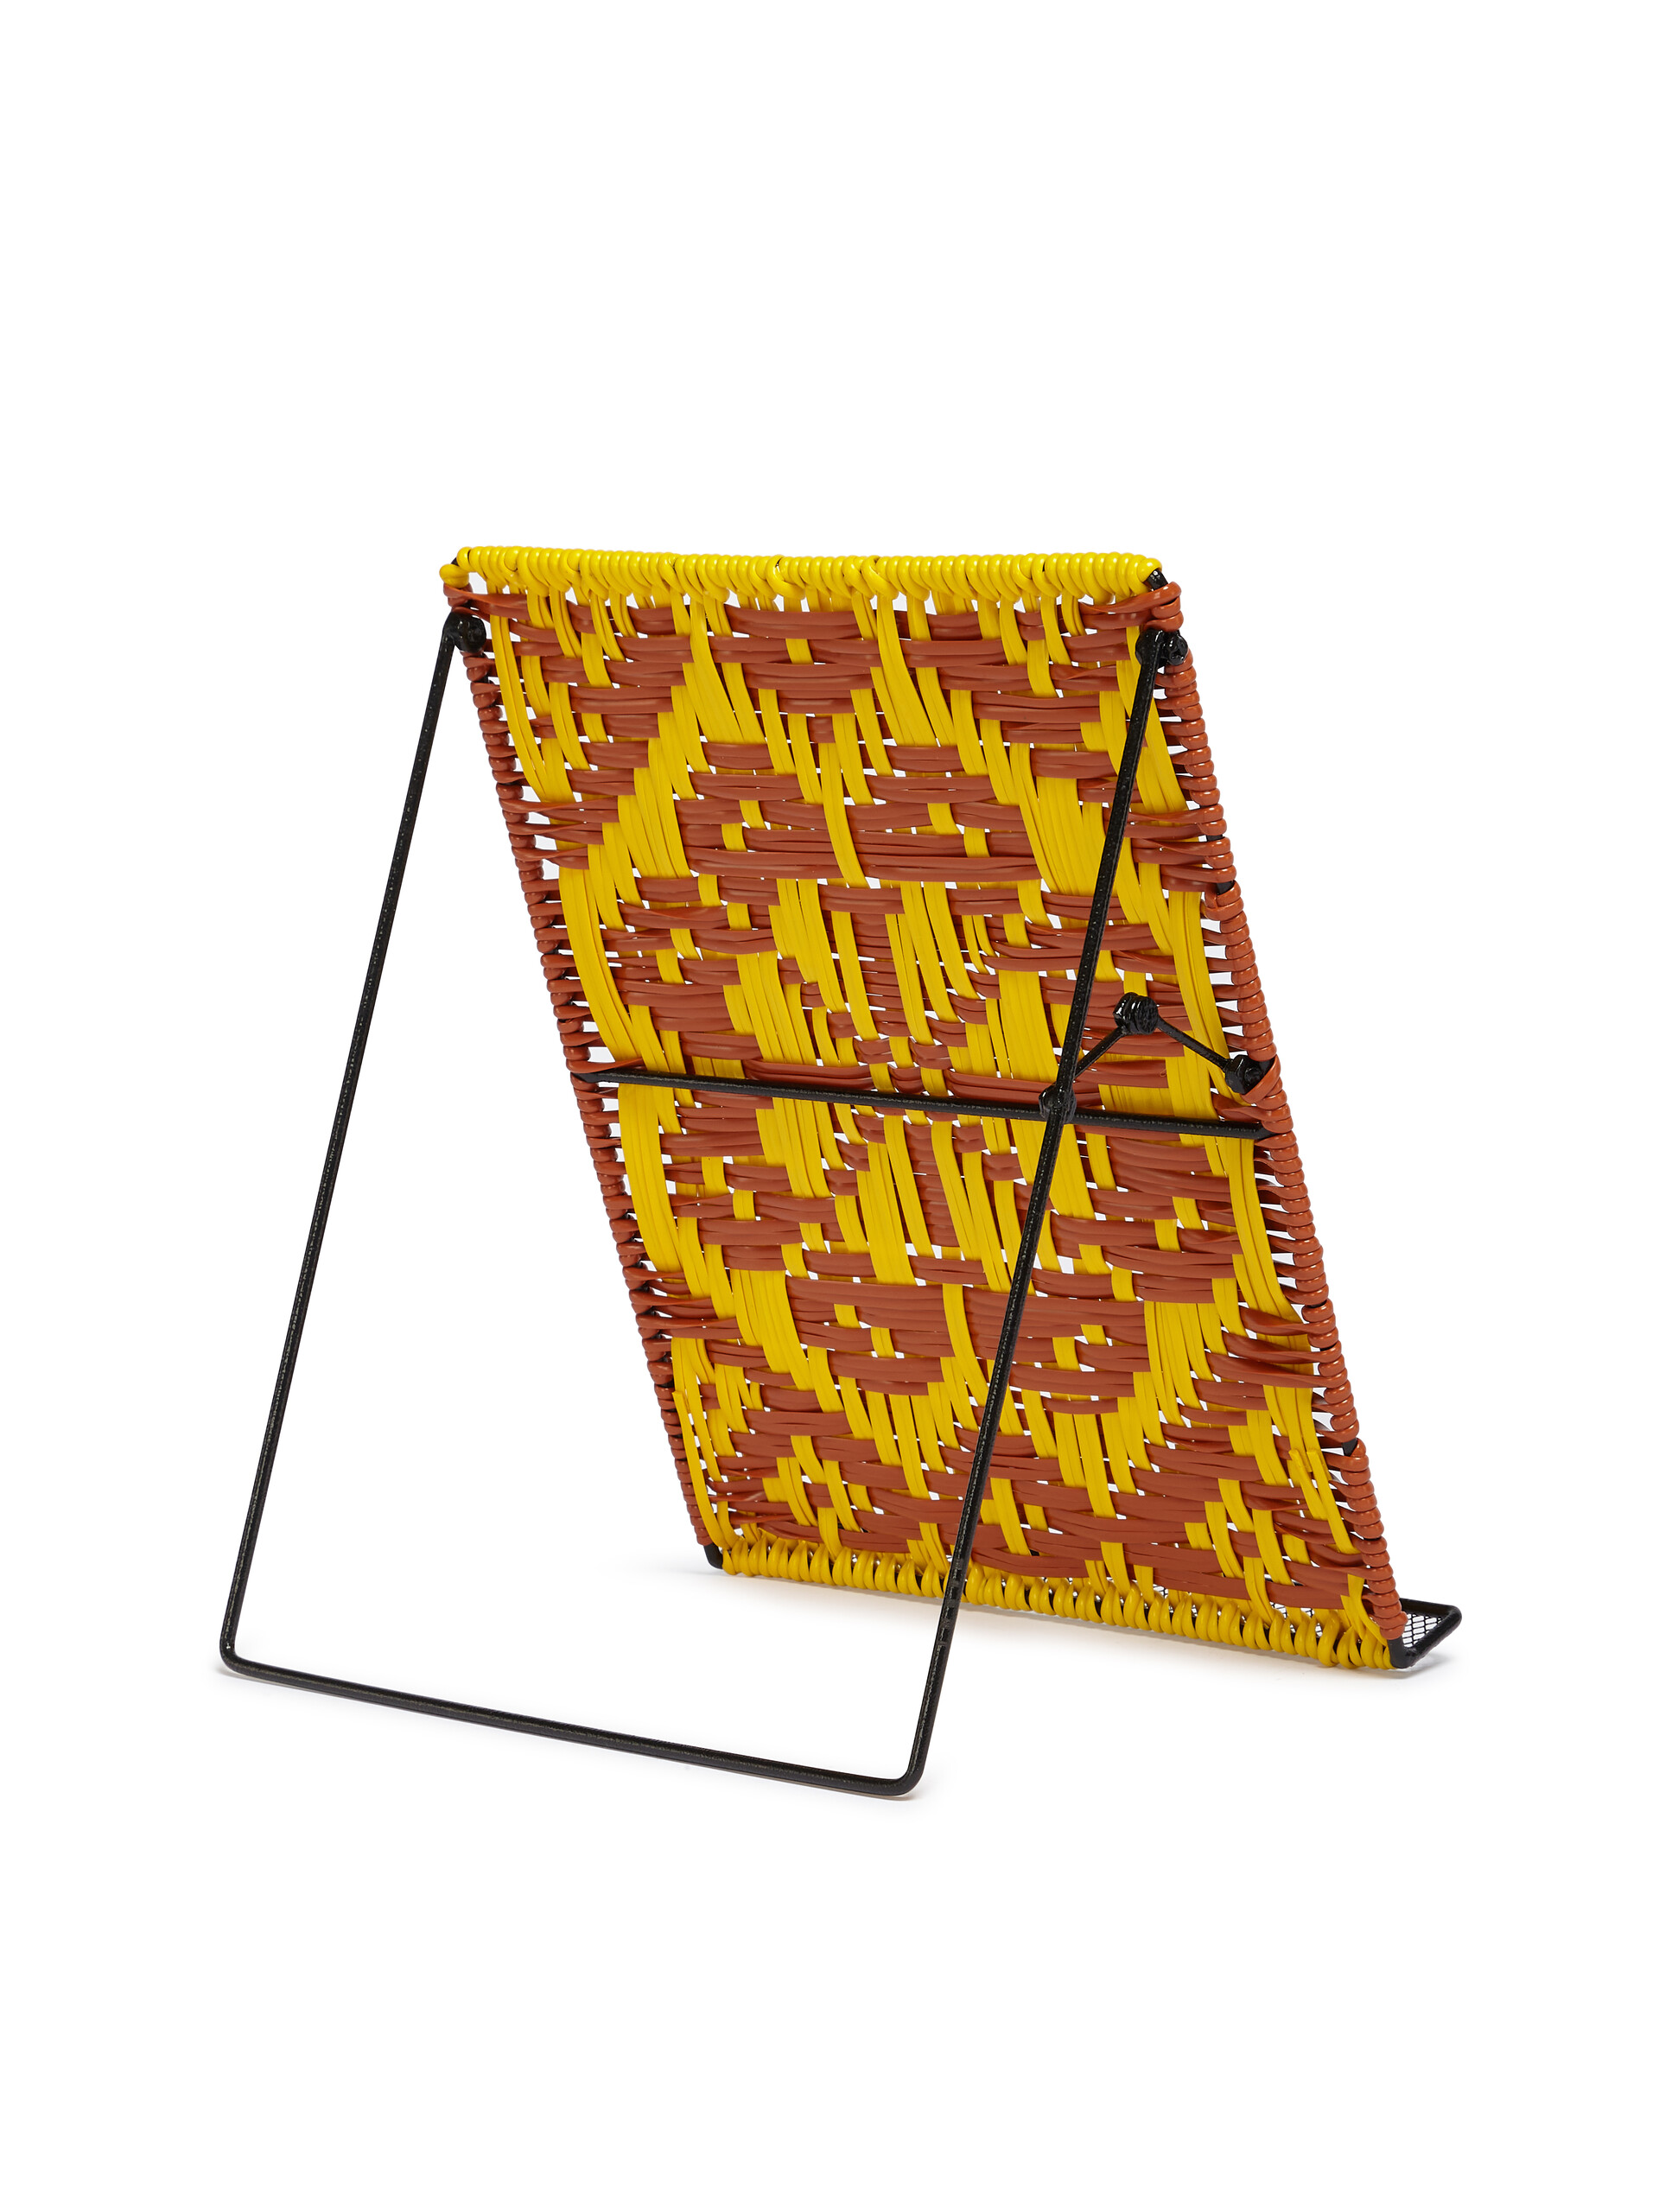 MARNI MARKET yellow and red woven iPad stand - Furniture - Image 4